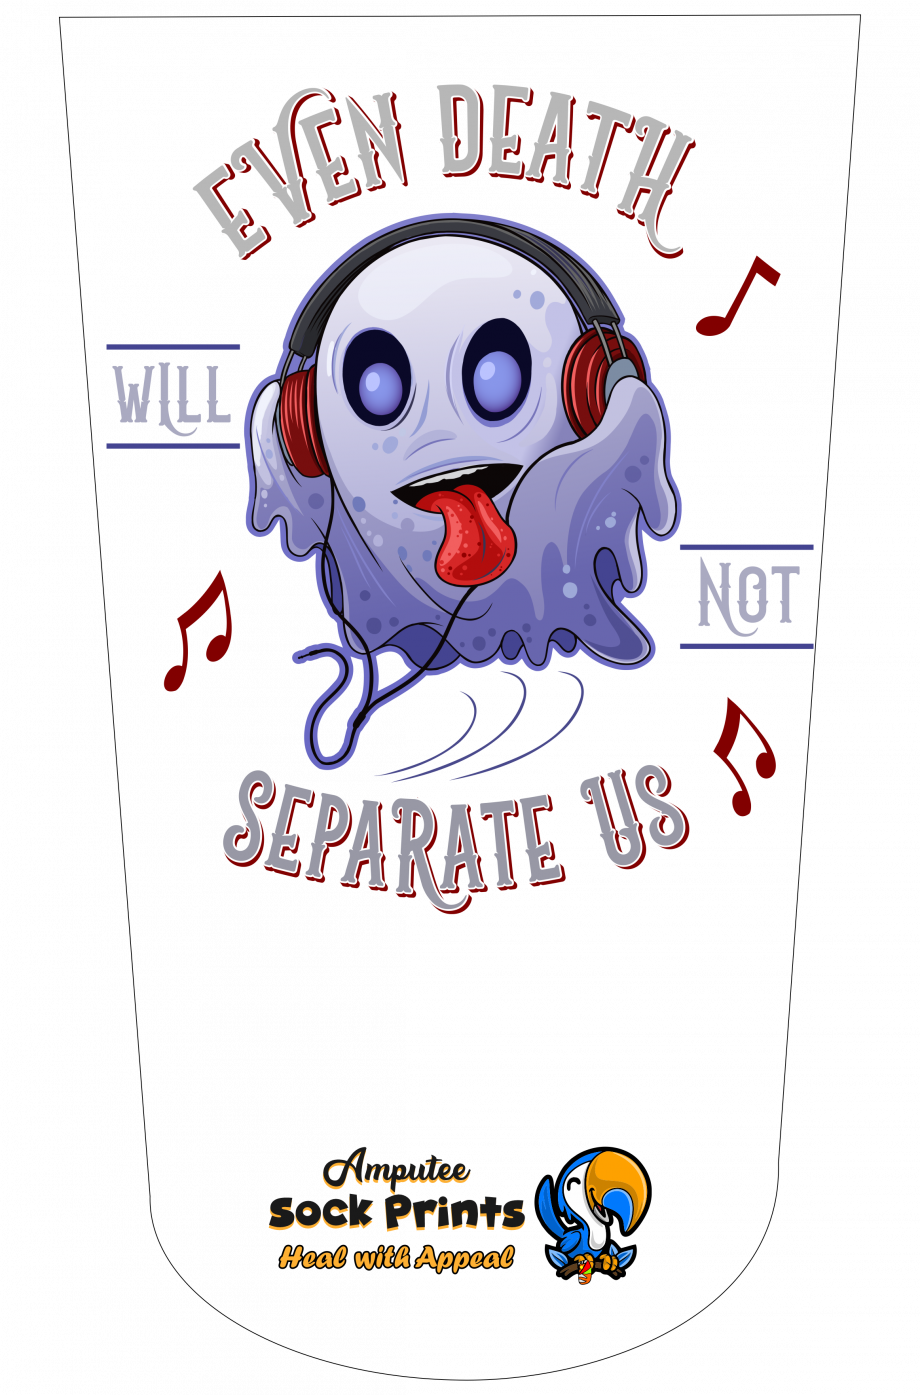 Death Will Not Seperate Us V1